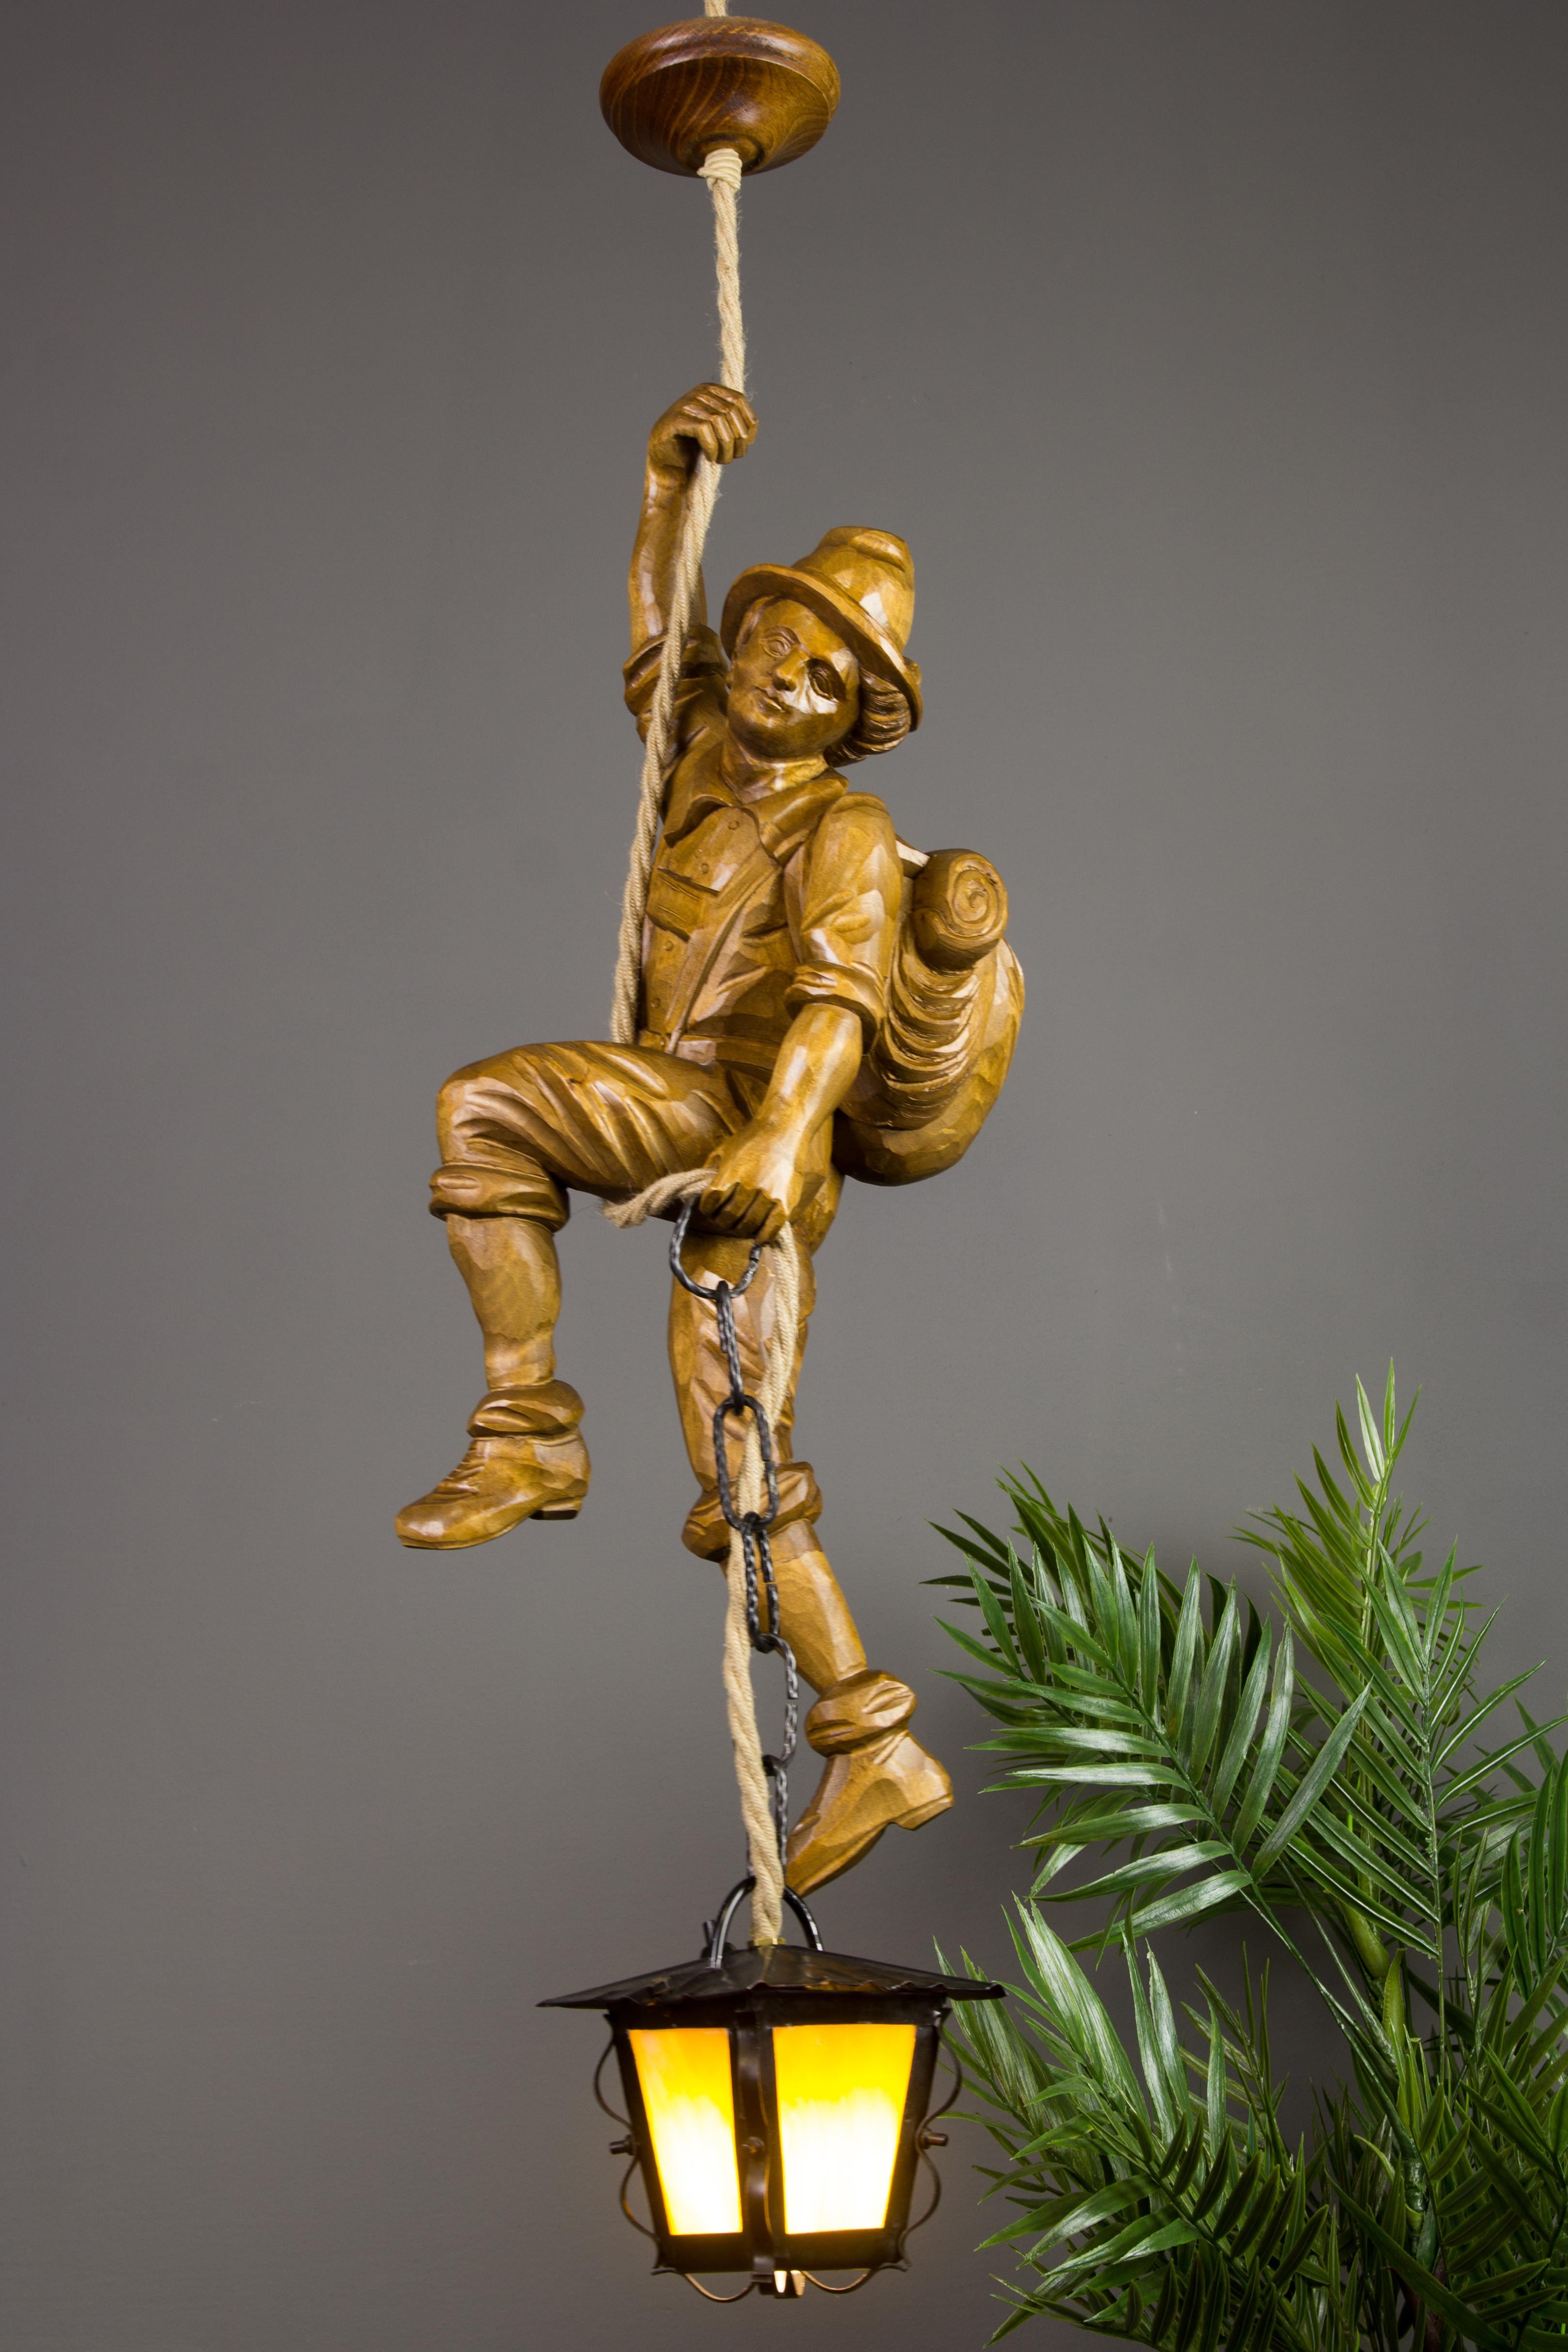 This wonderful German Black Forest figural pendant lamp features a hand-carved figure of a mountain climber. The detailed carved wooden mountaineer with a backpack is holding onto a rope and holding a metal lantern with yellow glass in one hand.
The